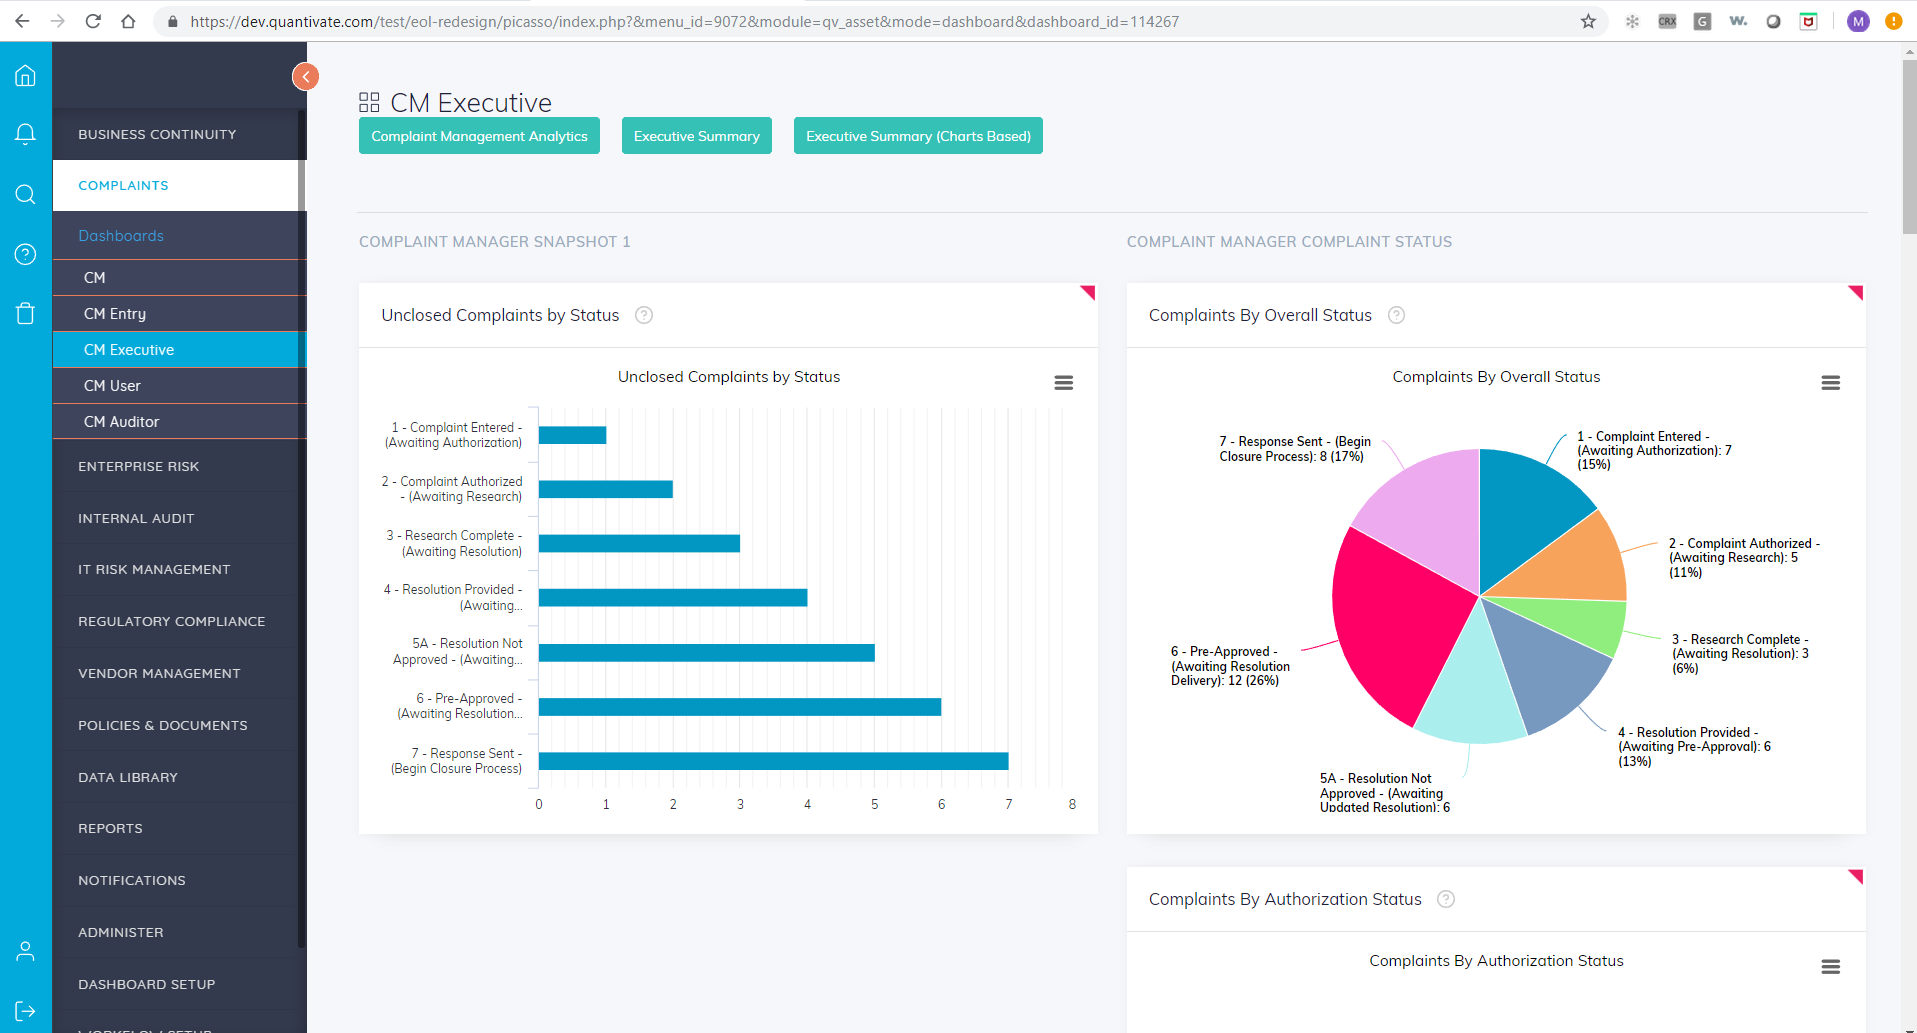 Complaint Management Dashboard - Leverage data from integrated applications to form a comprehensive view.